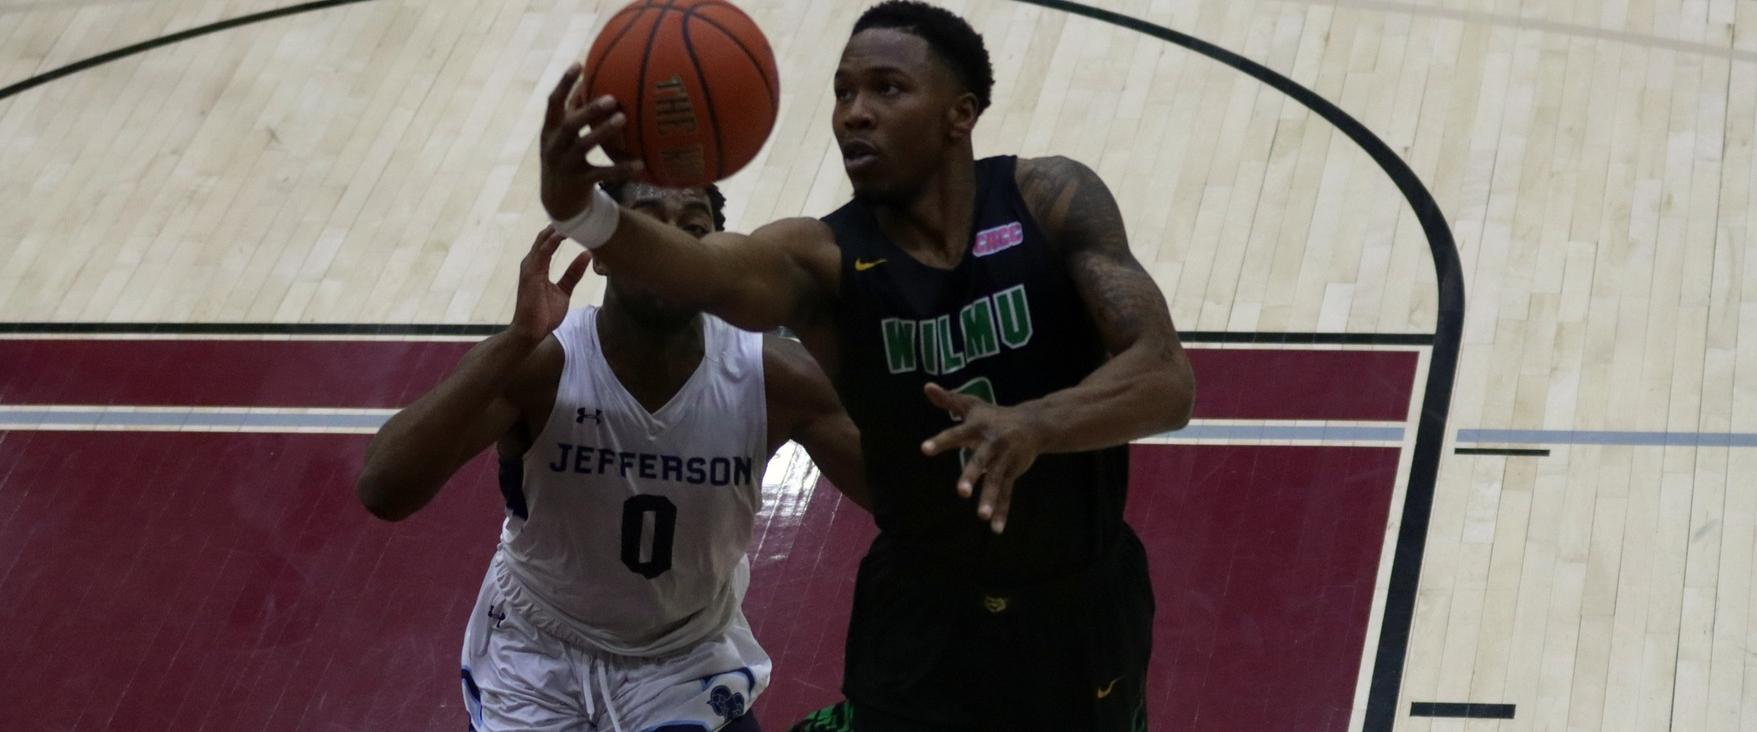 File photo of Kam Cooper who led the Wildcats with 18 points on Saturday at St. Michael's. Copyright 2020. Wilmington University. All rights reserved. Photo by Dan Lauletta. March 7, 2020 vs. Jefferson in CACC Tournament Semi Final Game.